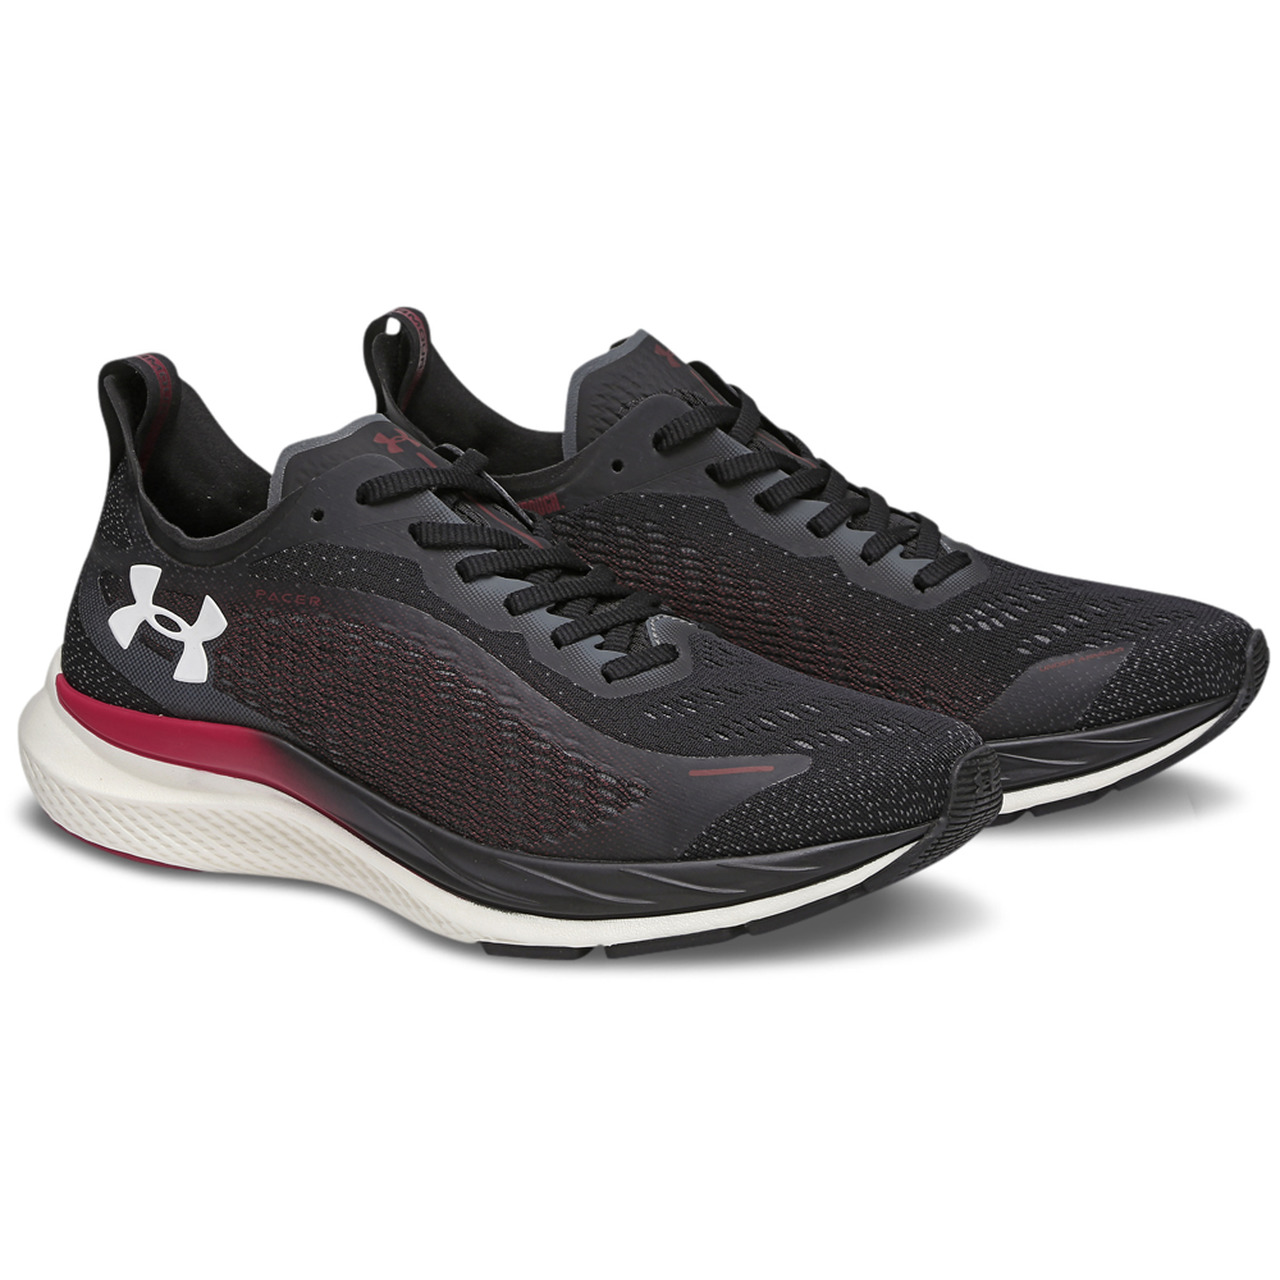 Tênis under armour pacer masculino